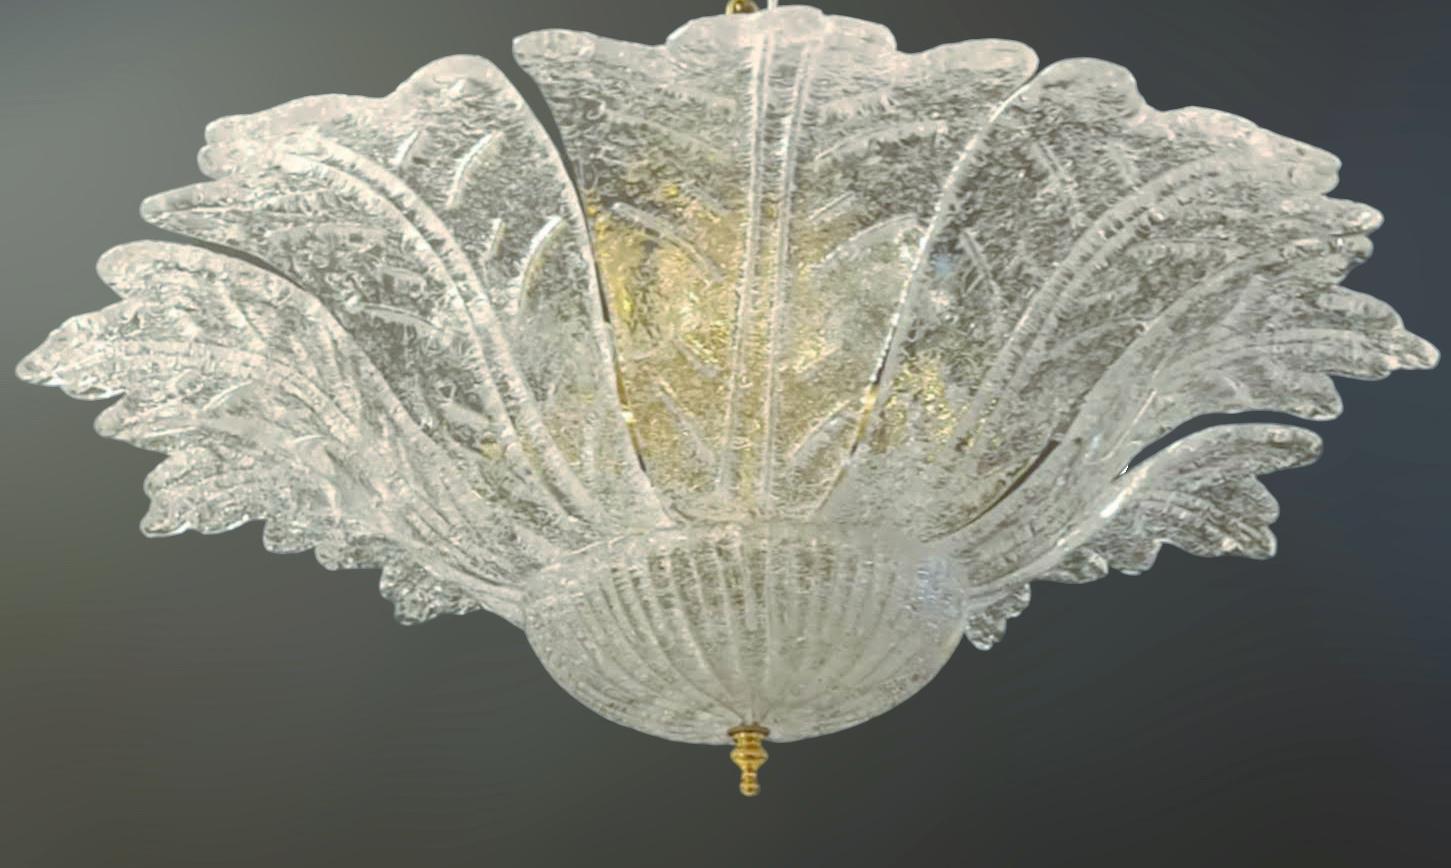 Vintage Italian Murano glass flush mount with clear graniglia glass leaves mounted on gold metal frame / Made in Italy in the style of Barovier e Toso, circa 1960s
6 lights / E12 or E14 type / max 40W each
Measures: Diameter 25.5 inches, height 10